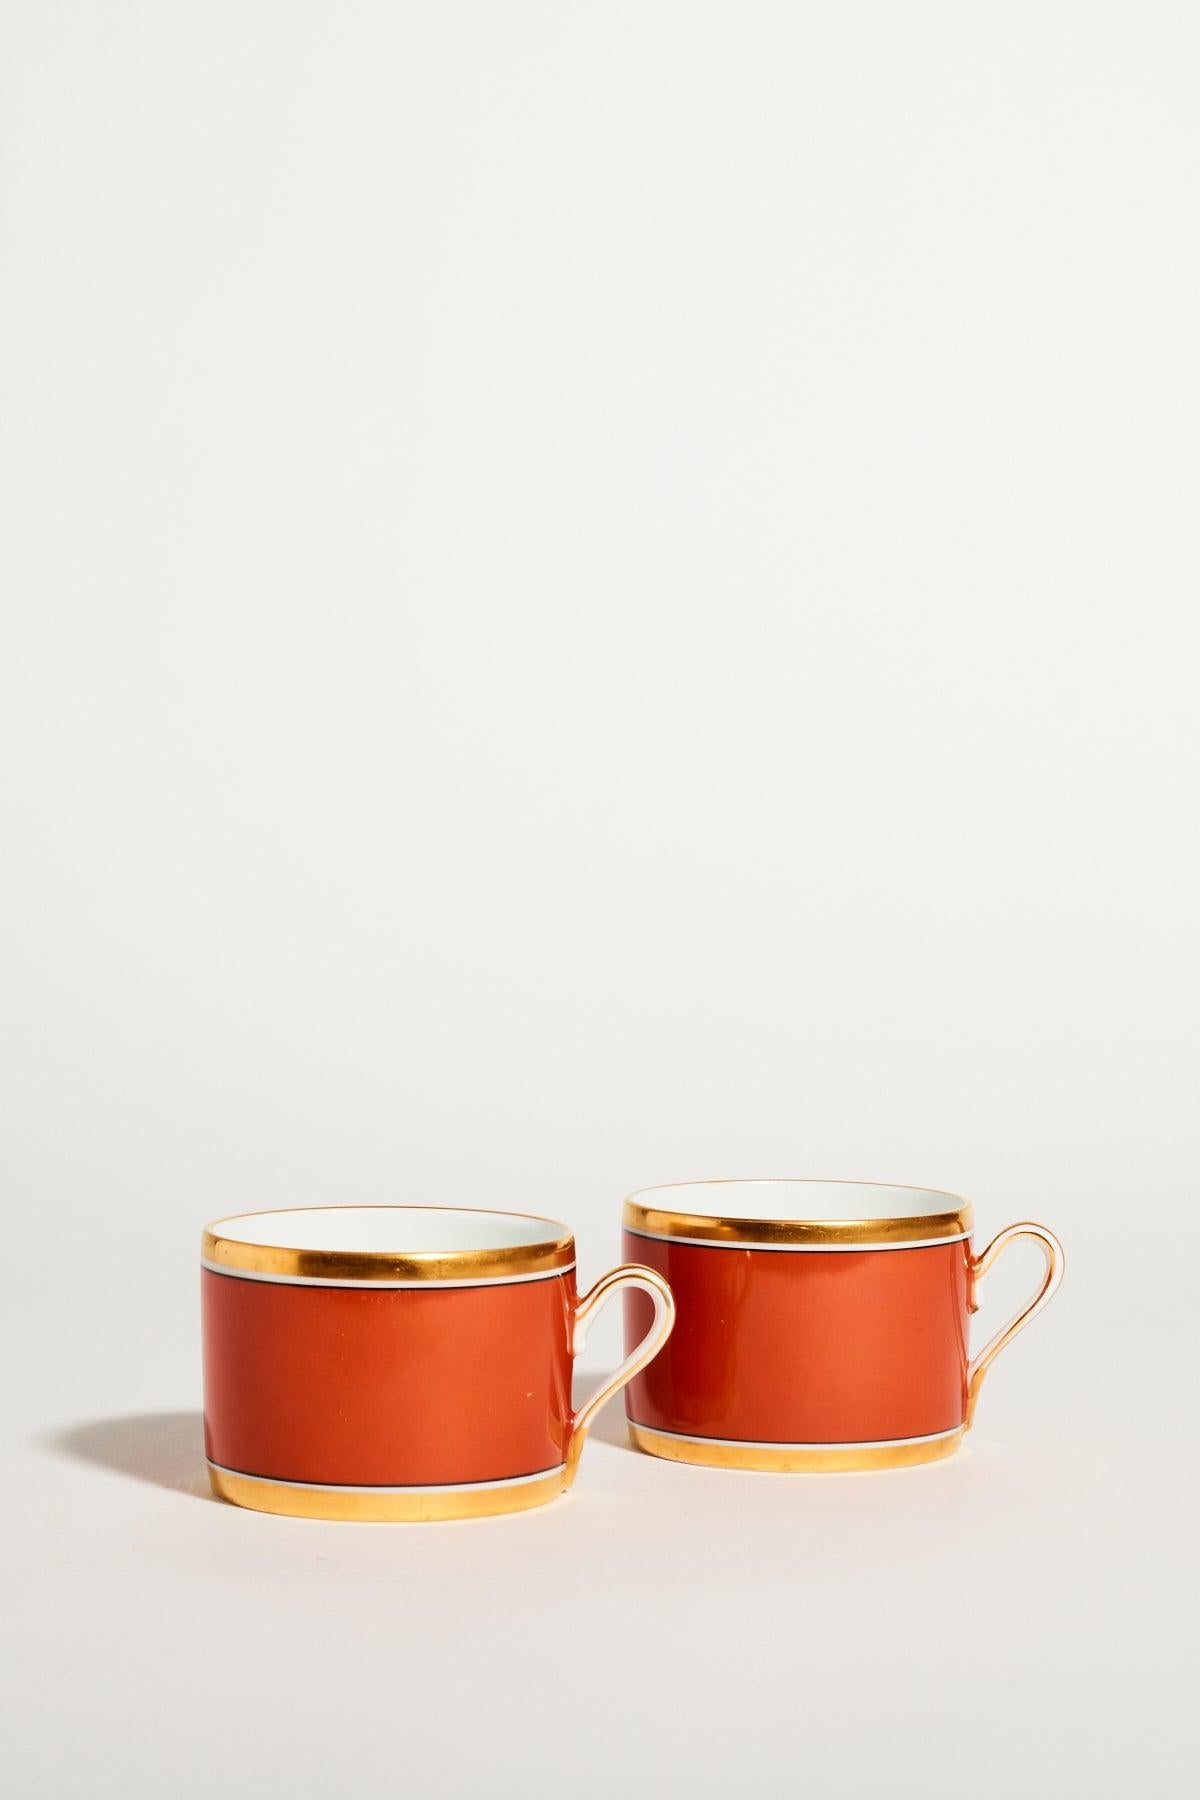 Richard Ginori quality porcelain coffee set of two, burnt orange contrasted against crisp white embellished with gold trim.